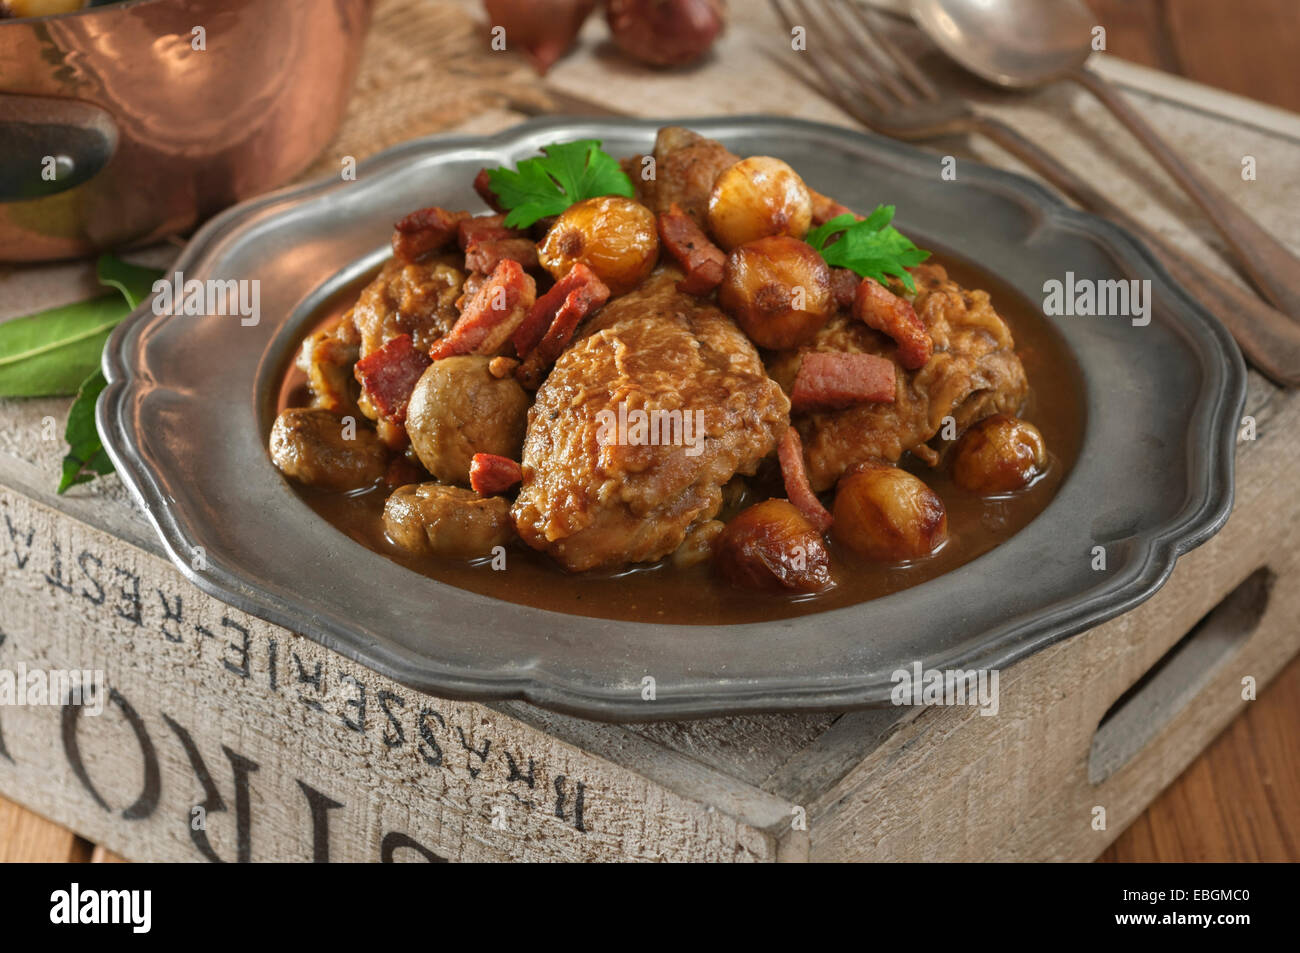 Coq au vin. Chicken cooked with red wine. France Food Stock Photo